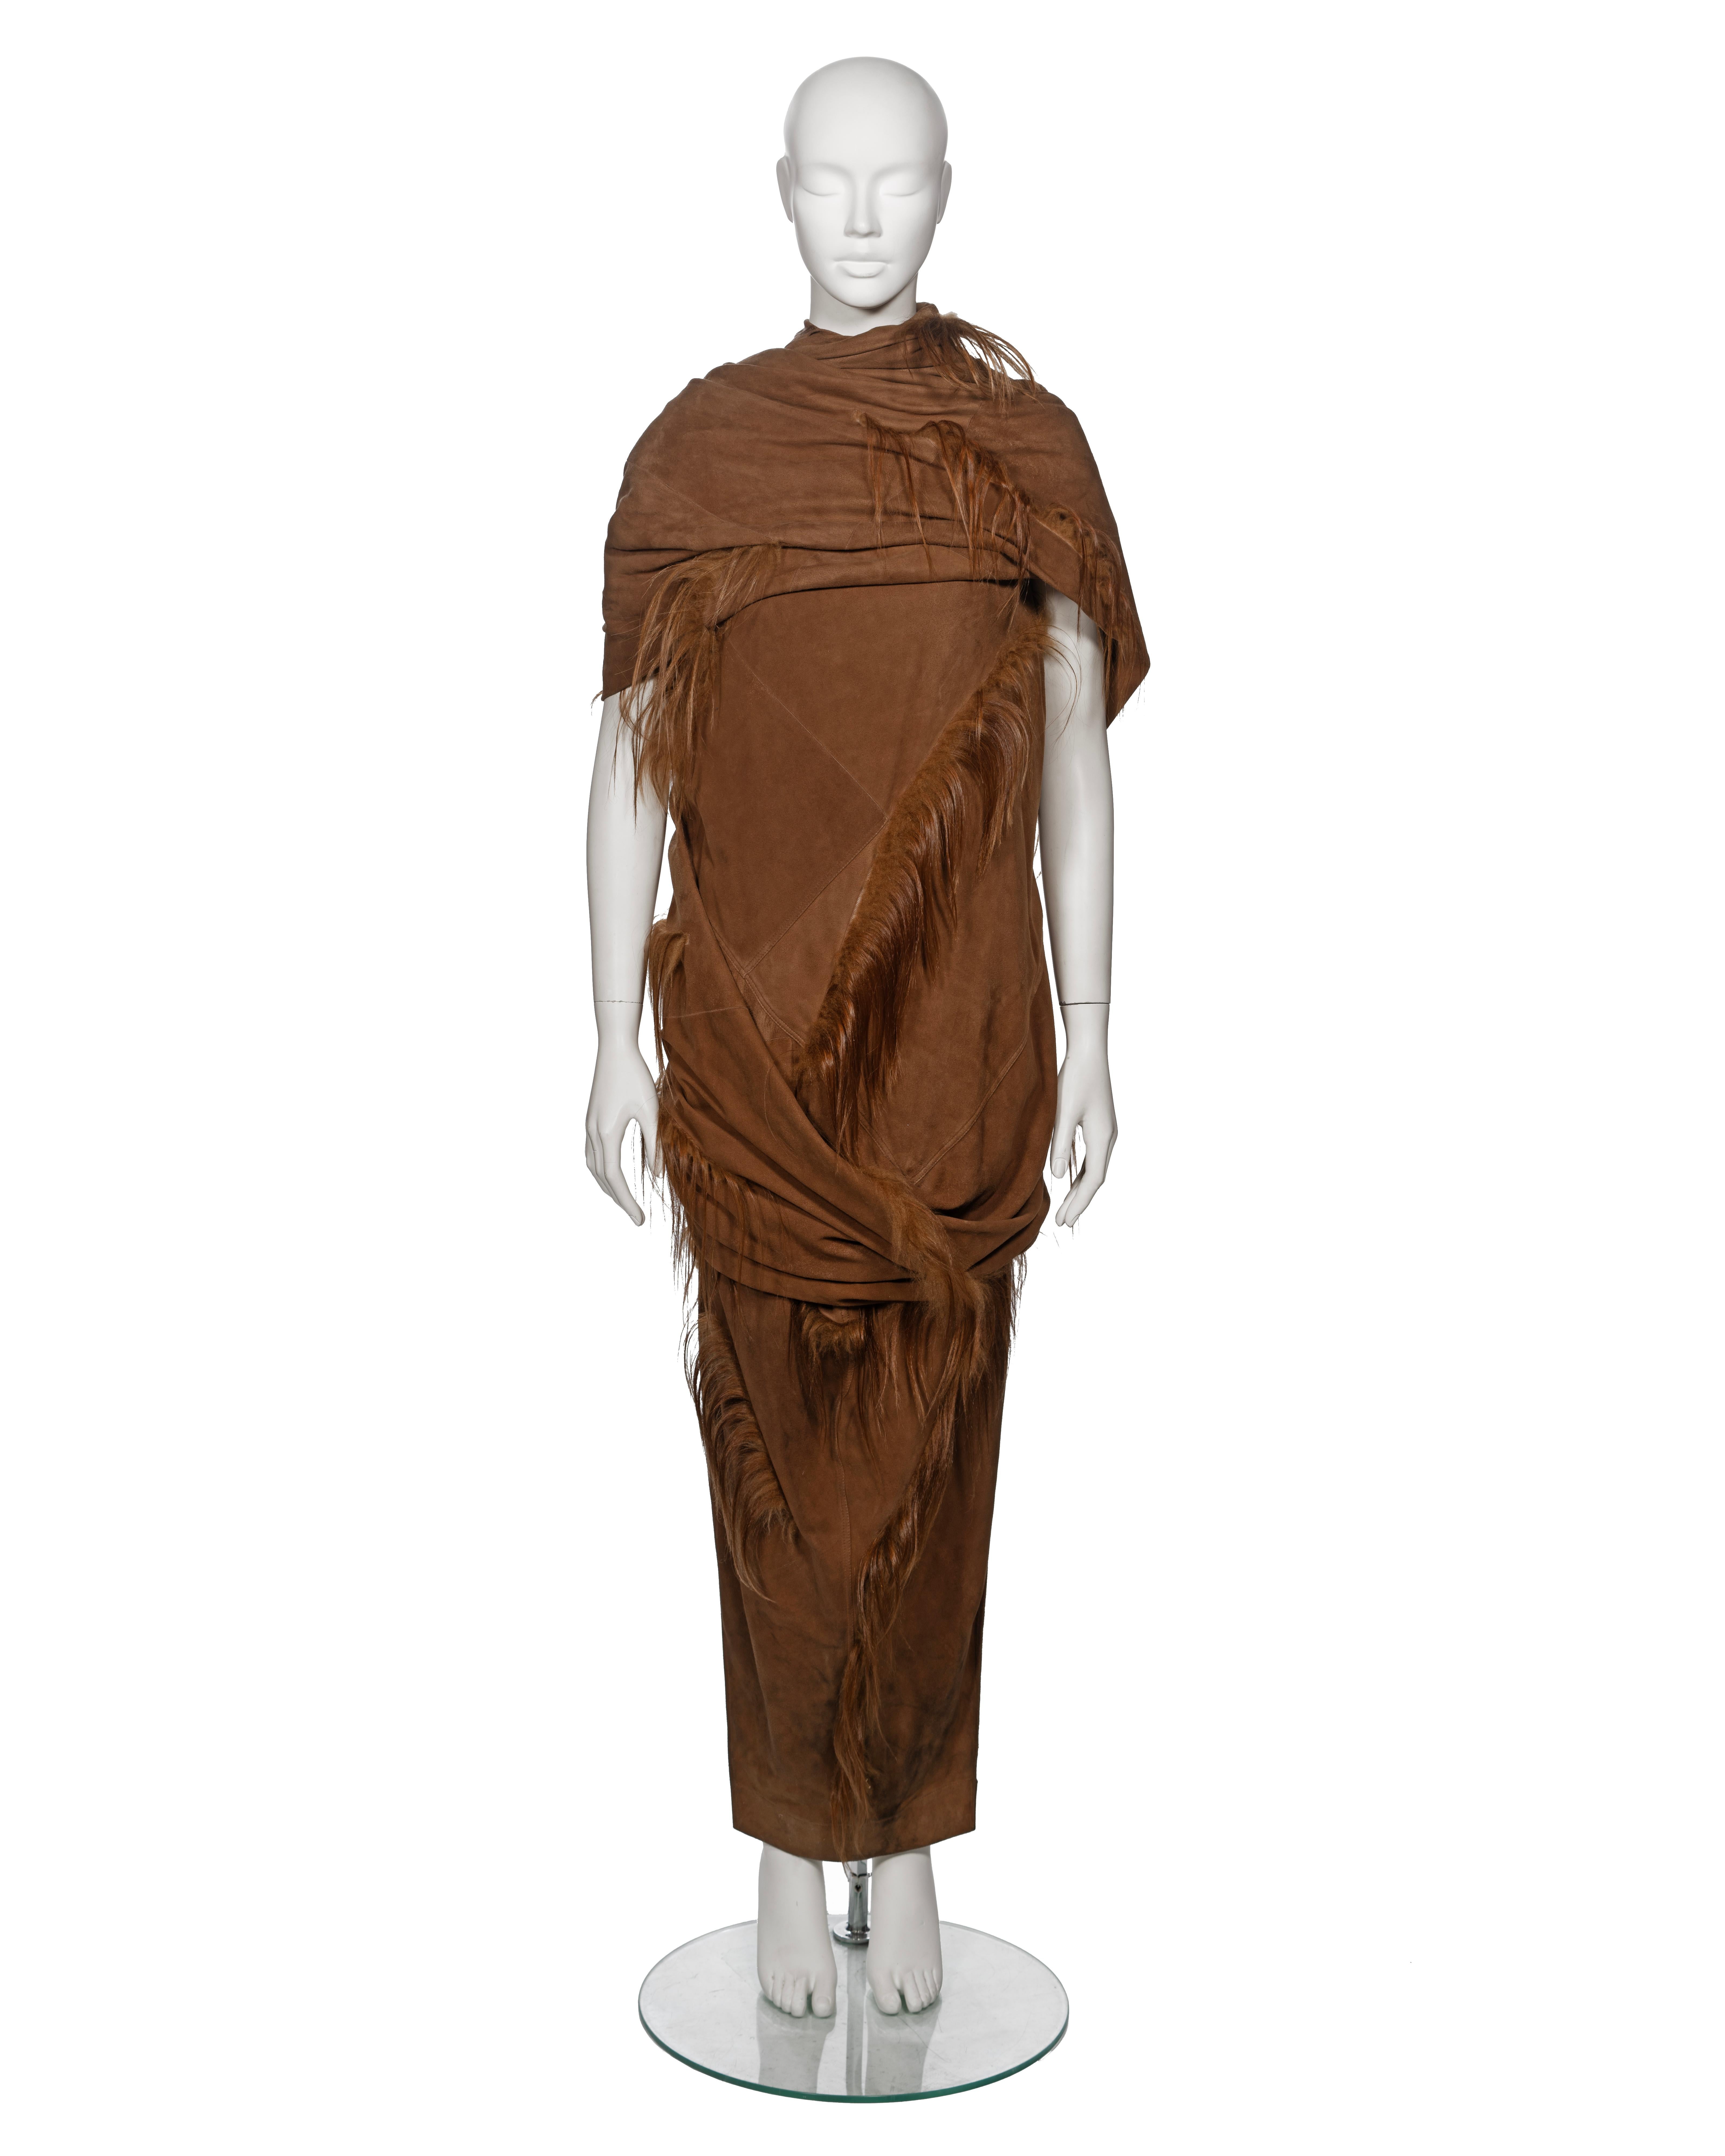 ▪ Archival Rick Owens 'Sphinx' Runway Ensemble 
▪ Fall-Winter 2015
▪ Sold by One of a Kind Archive
▪ Crafted from multiple panels of chestnut suede
▪ Embellished with goat hair trimmings
▪ Asymmetric draped top boasts a high neck and expansive